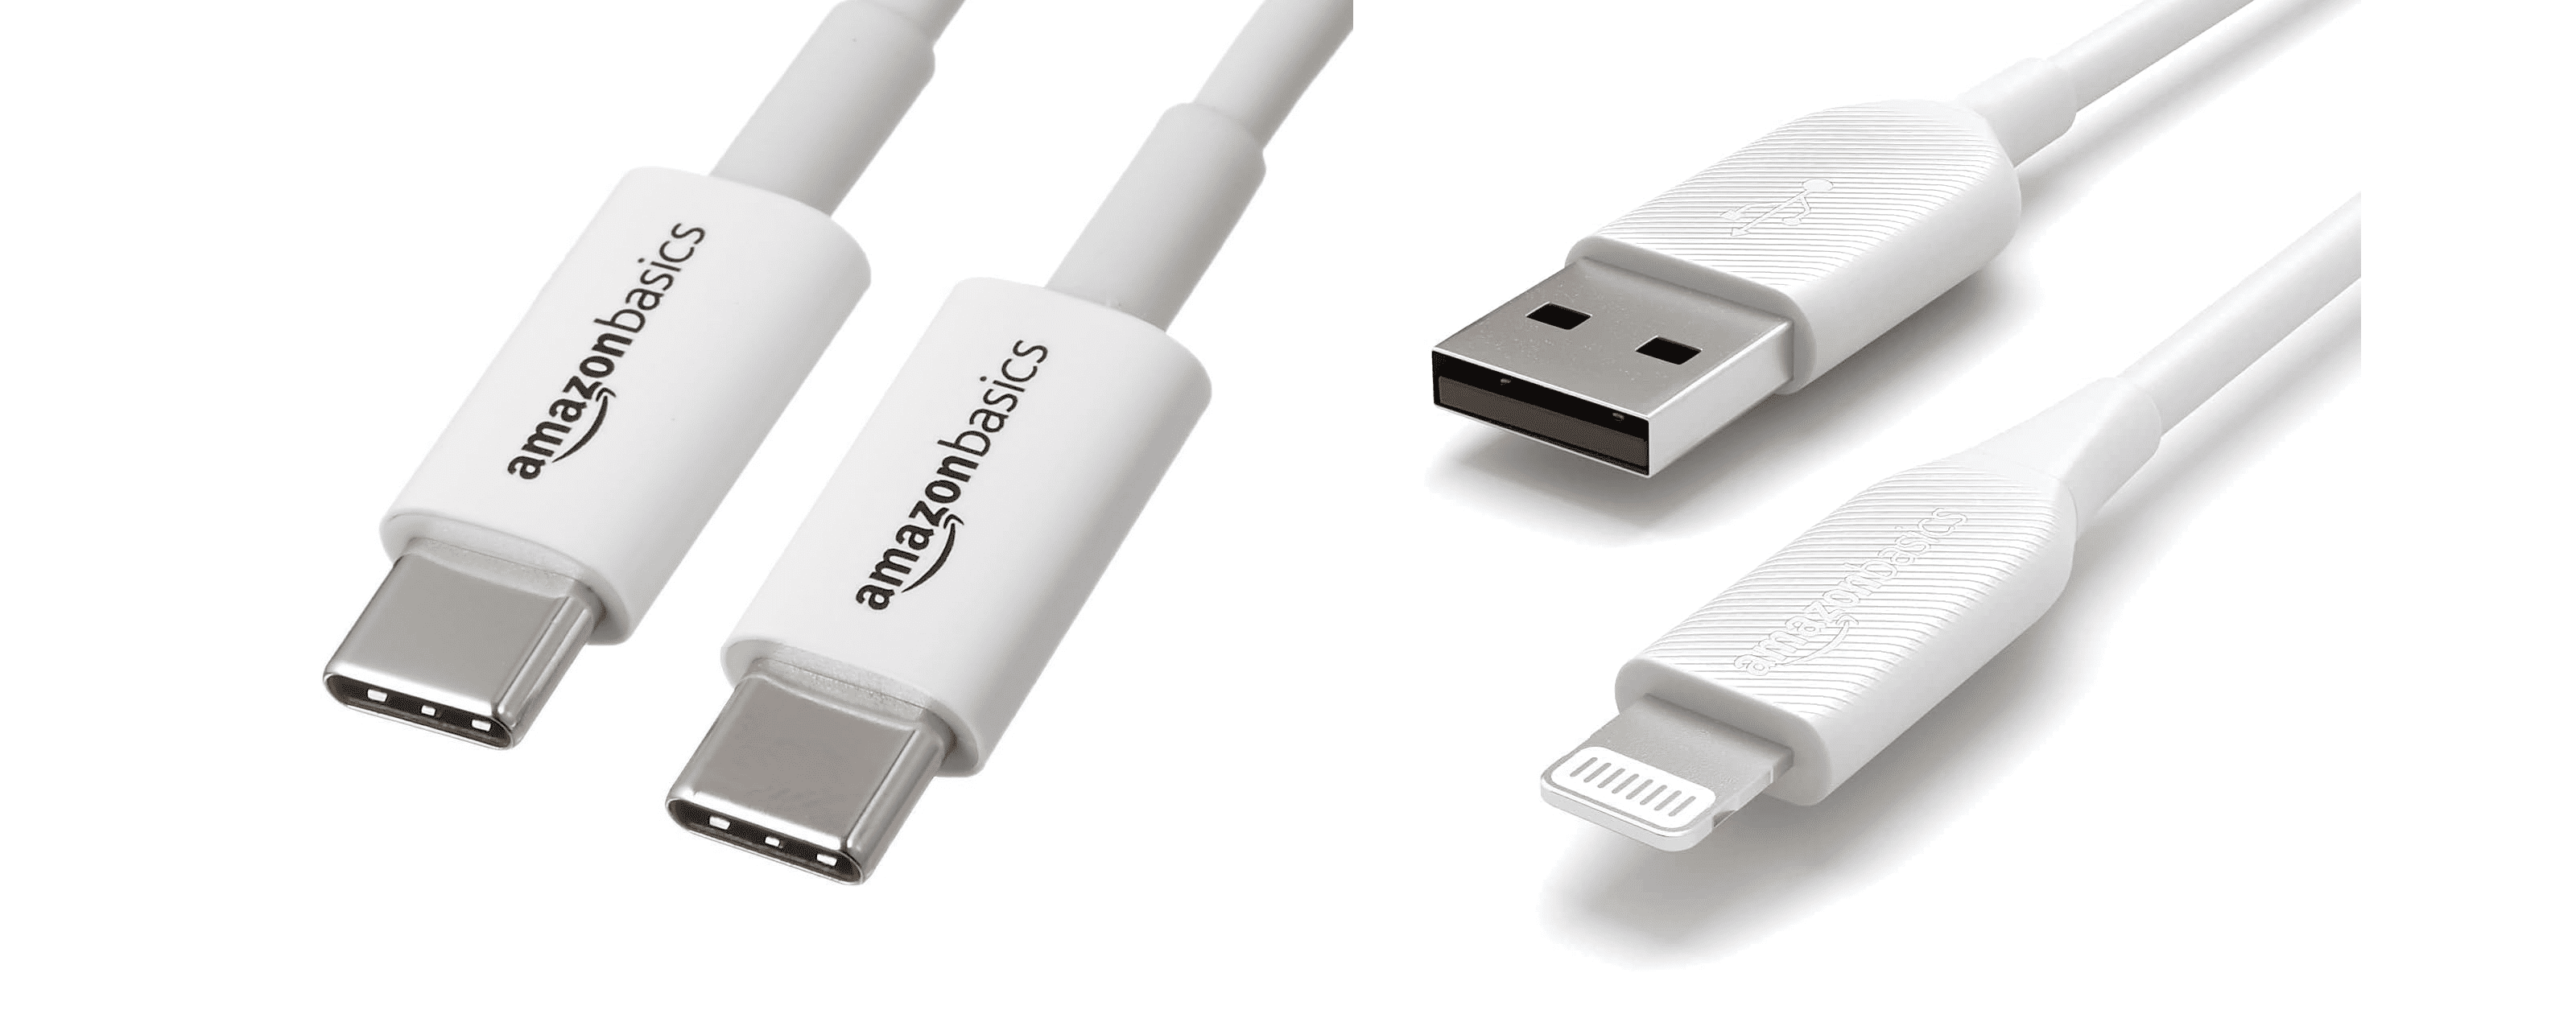 Why Is USB-C Better Than USB-A? –